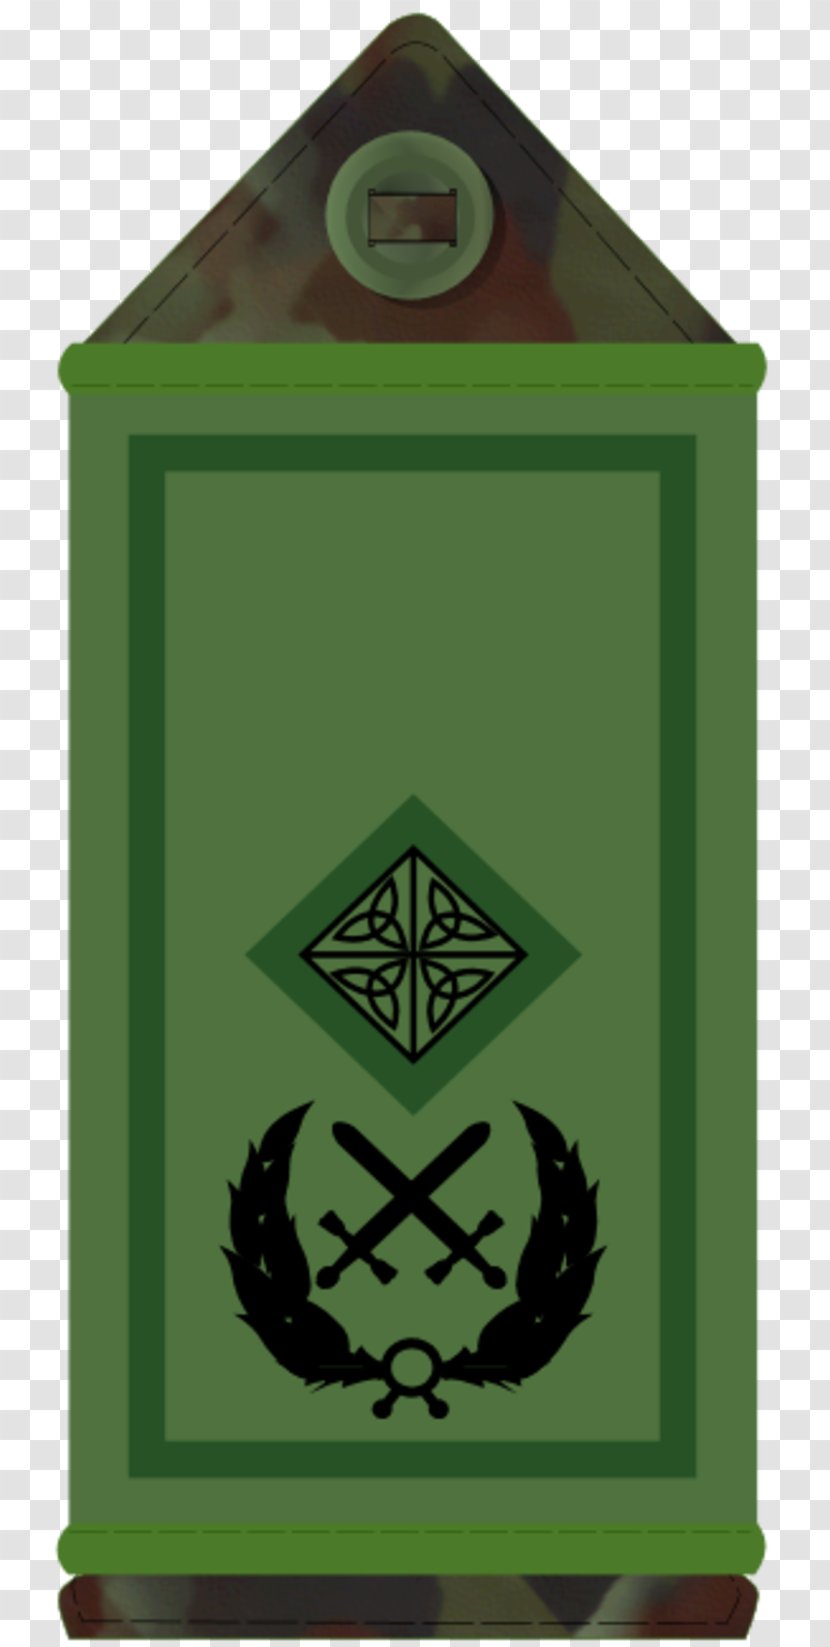 Ireland Defence Forces Irish Army Military Rank - Insignia - Rank-and-file Transparent PNG